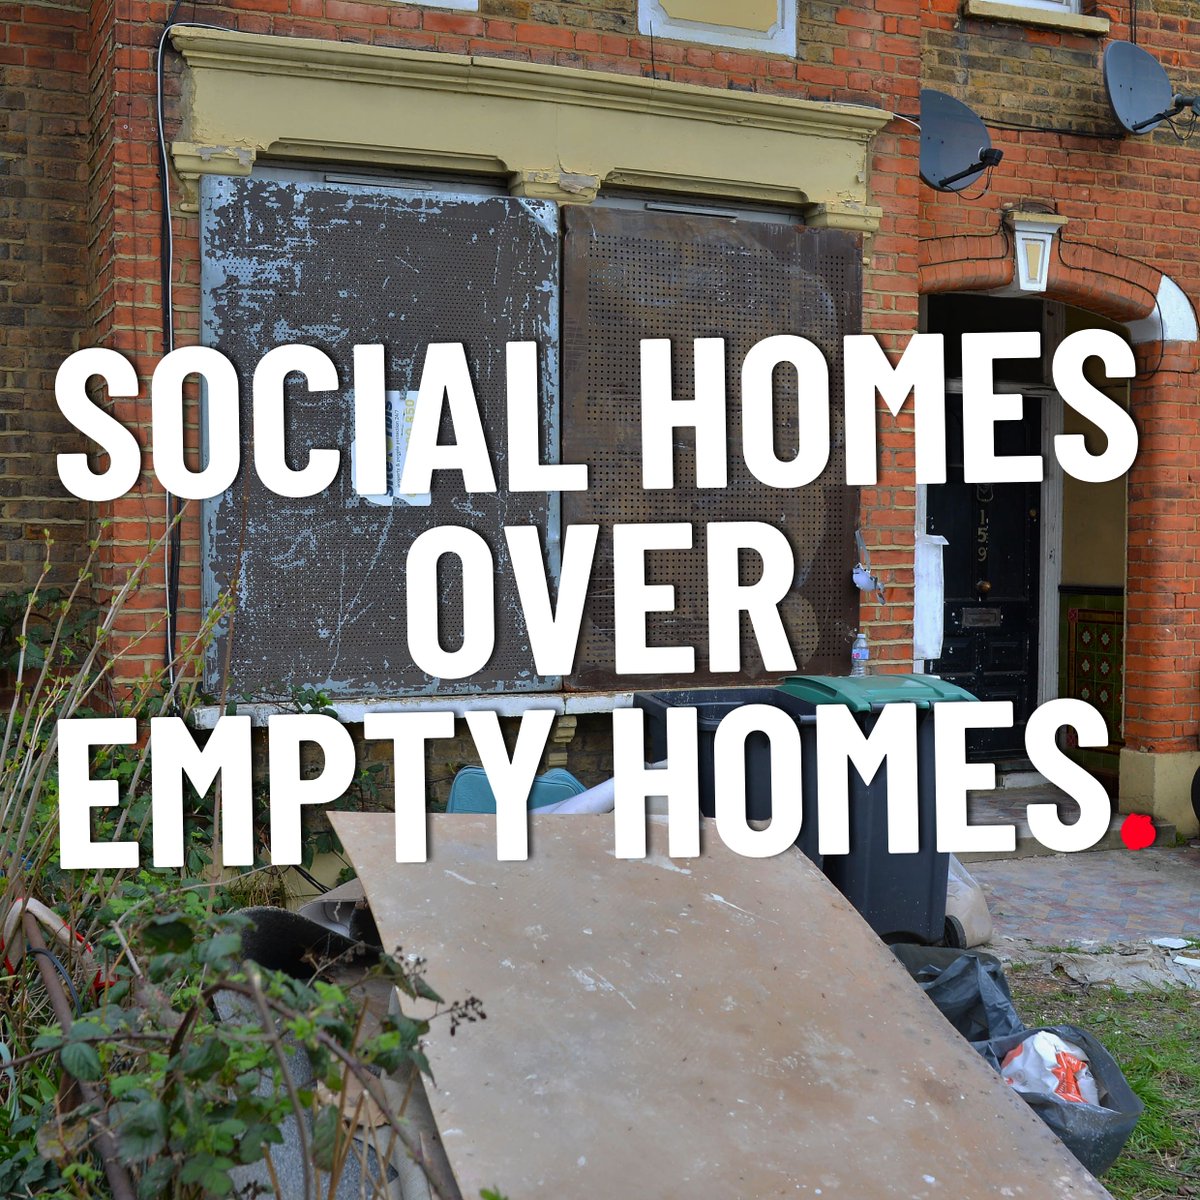 🚨 There are 261,000 long-term empty homes in England. Meanwhile, we desperately need more social homes. While nowhere near enough by itself to end the housing emergency, converting empty homes into social homes would help kickstart the delivery of homes we desperately need. 🧵